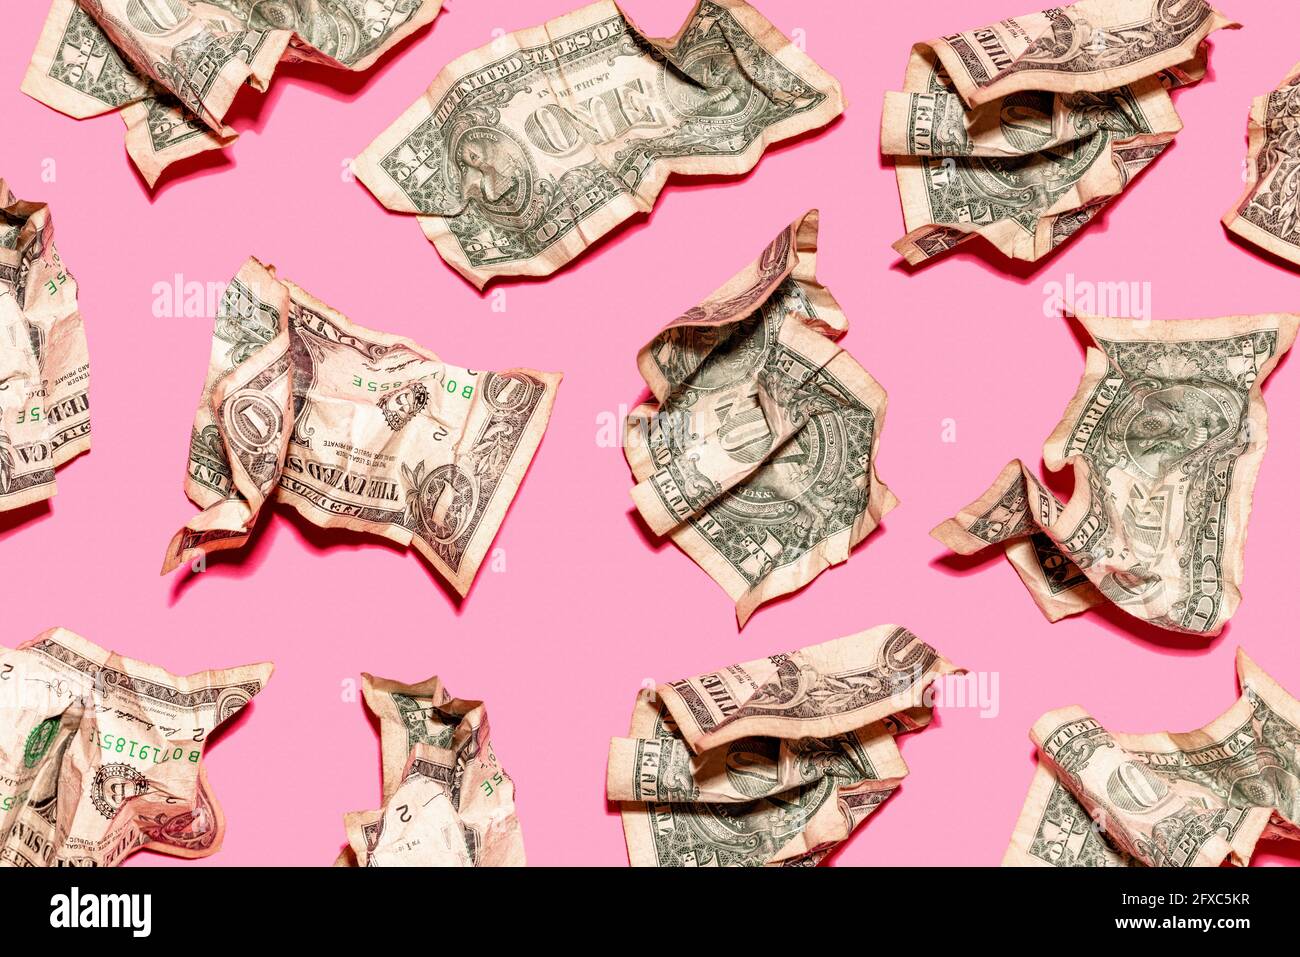 Pattern of crumpled one dollar bills lying against pink background Stock Photo